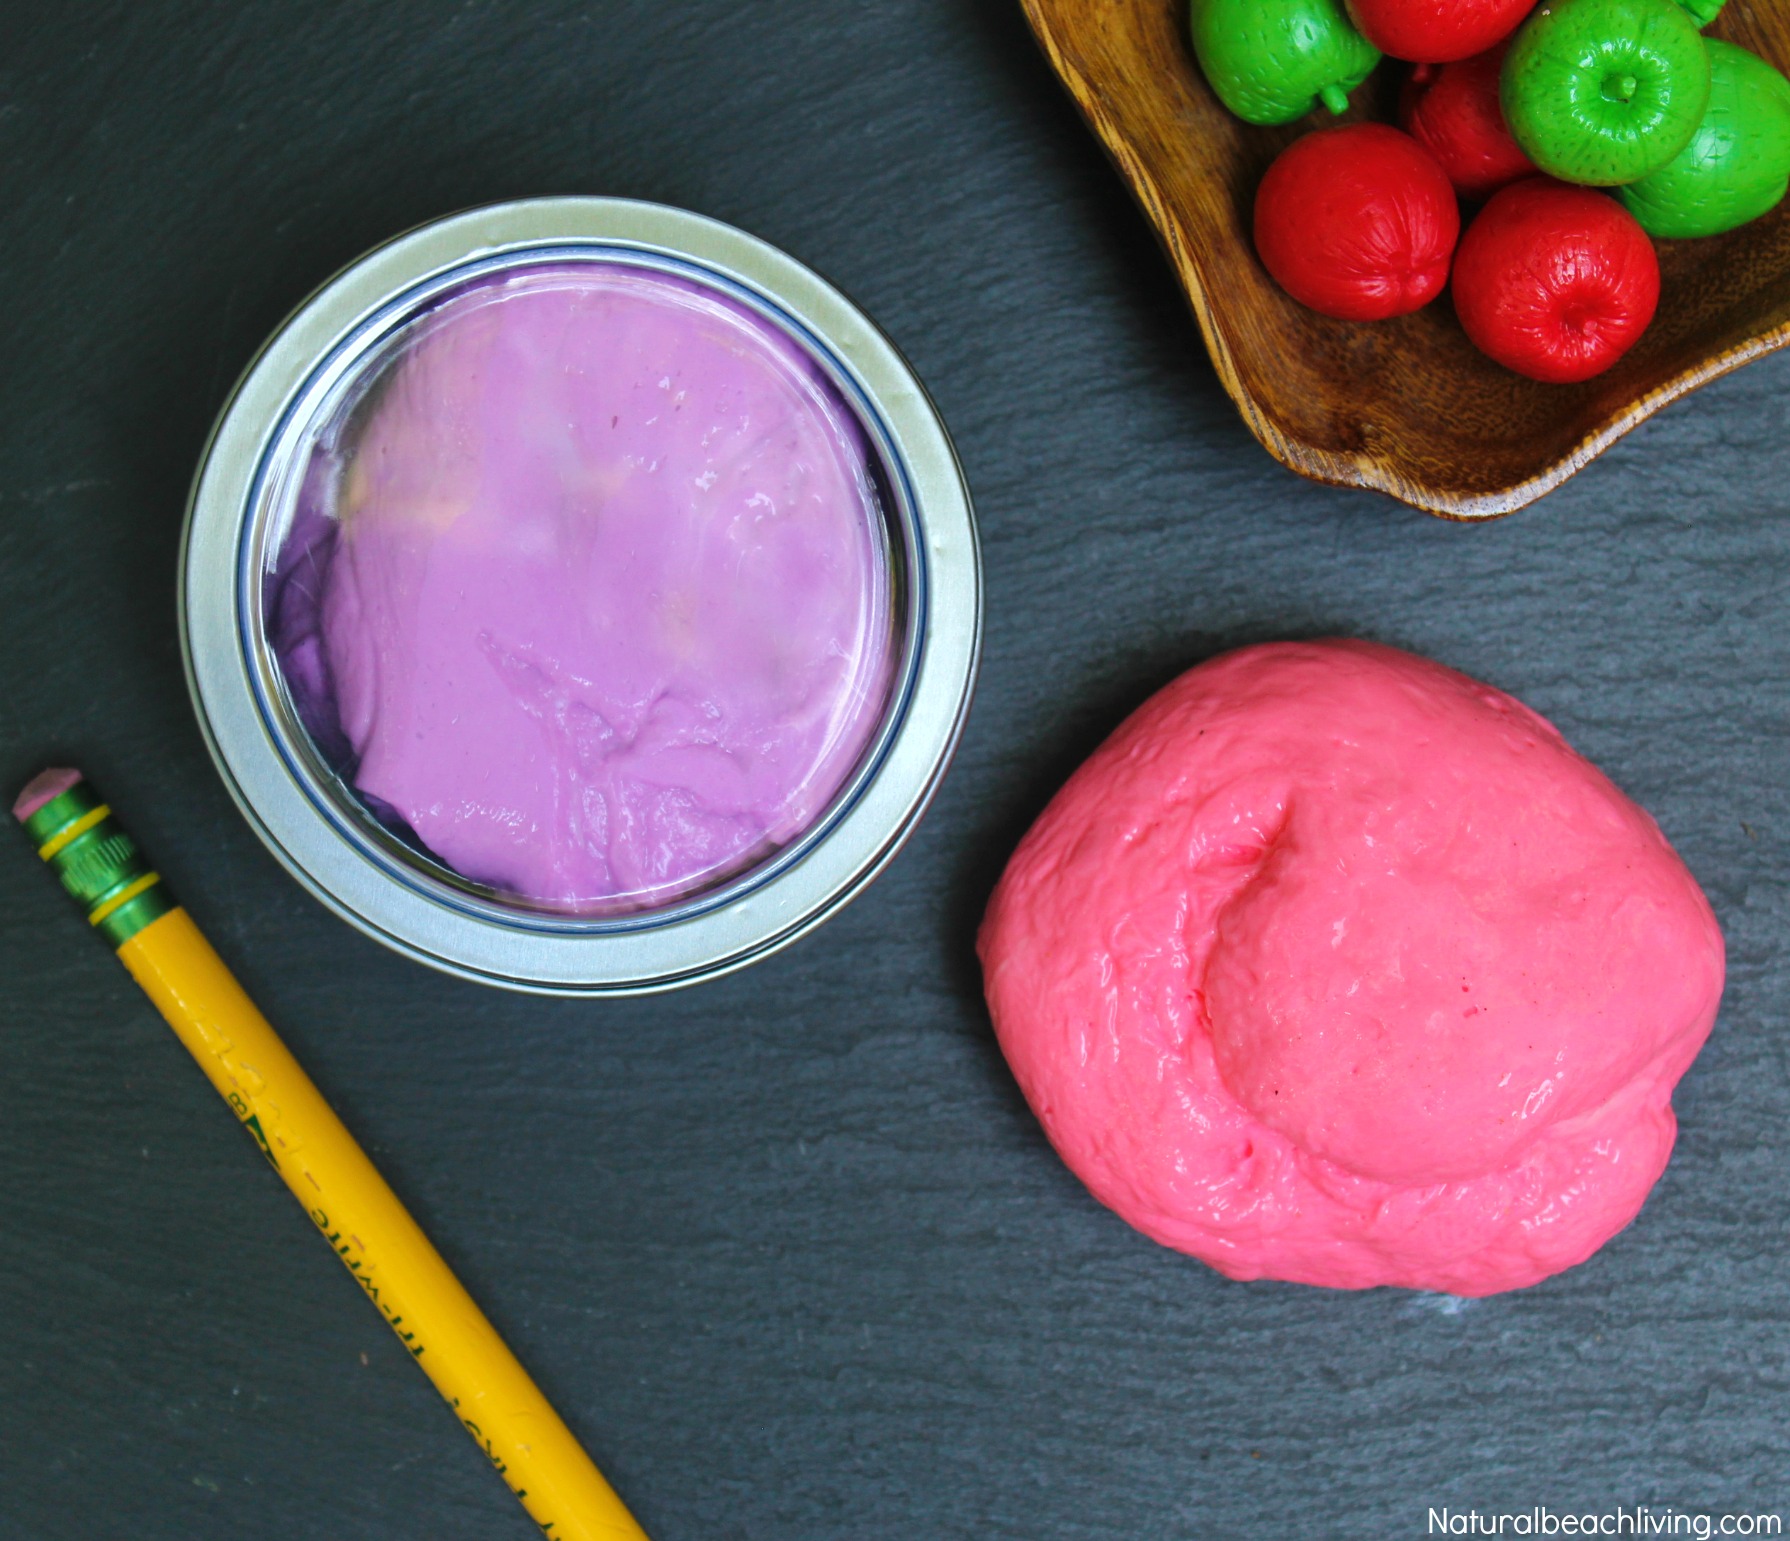 The Best Therapy Putty Recipe You'll Ever Make, Stress Putty, DIY Therapy Putty, Silly Putty Recipe, Homemade Stress Putty, Therapy Dough, Sensory Play